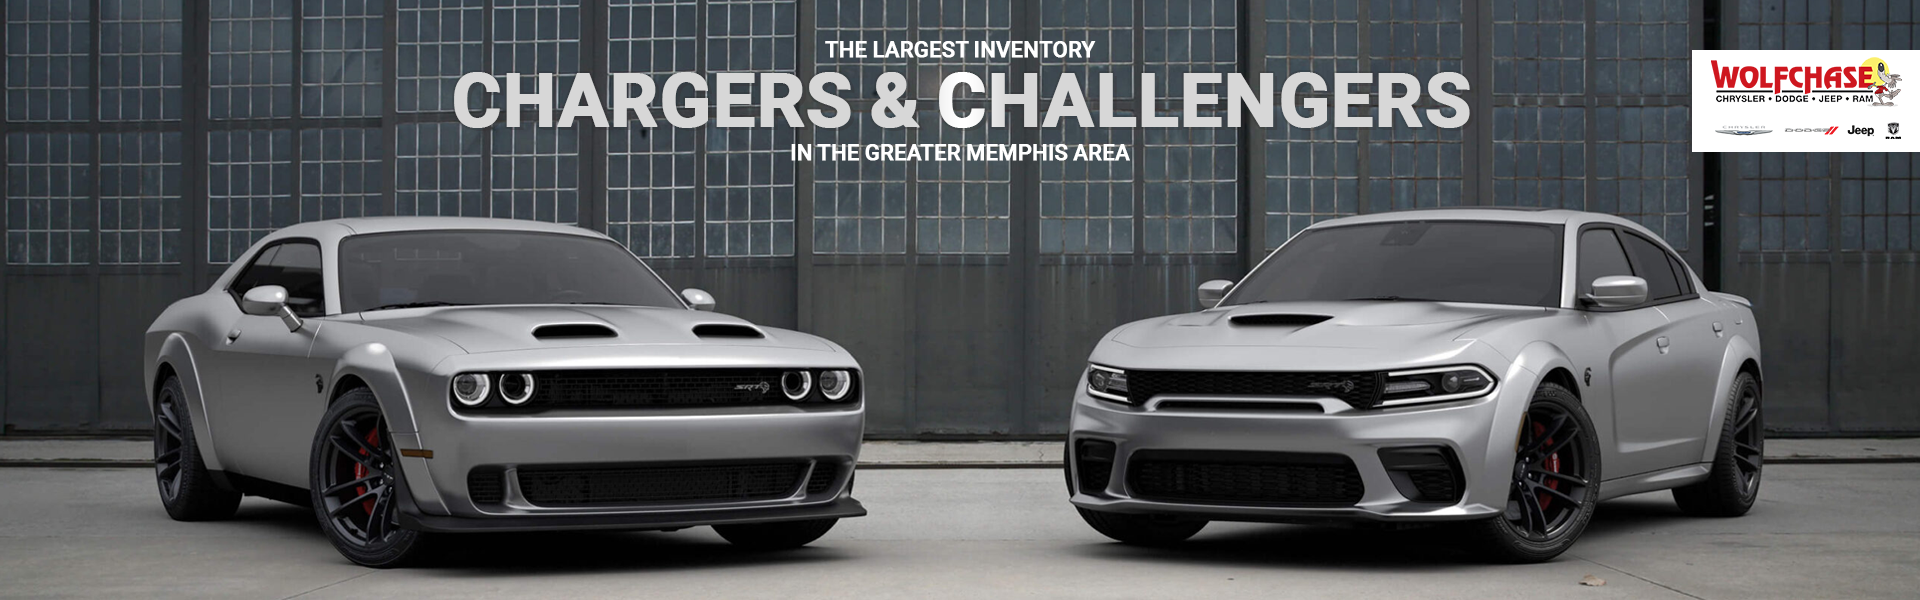 largest inventory of Chargers & Challengers at Wolfchase CDJ